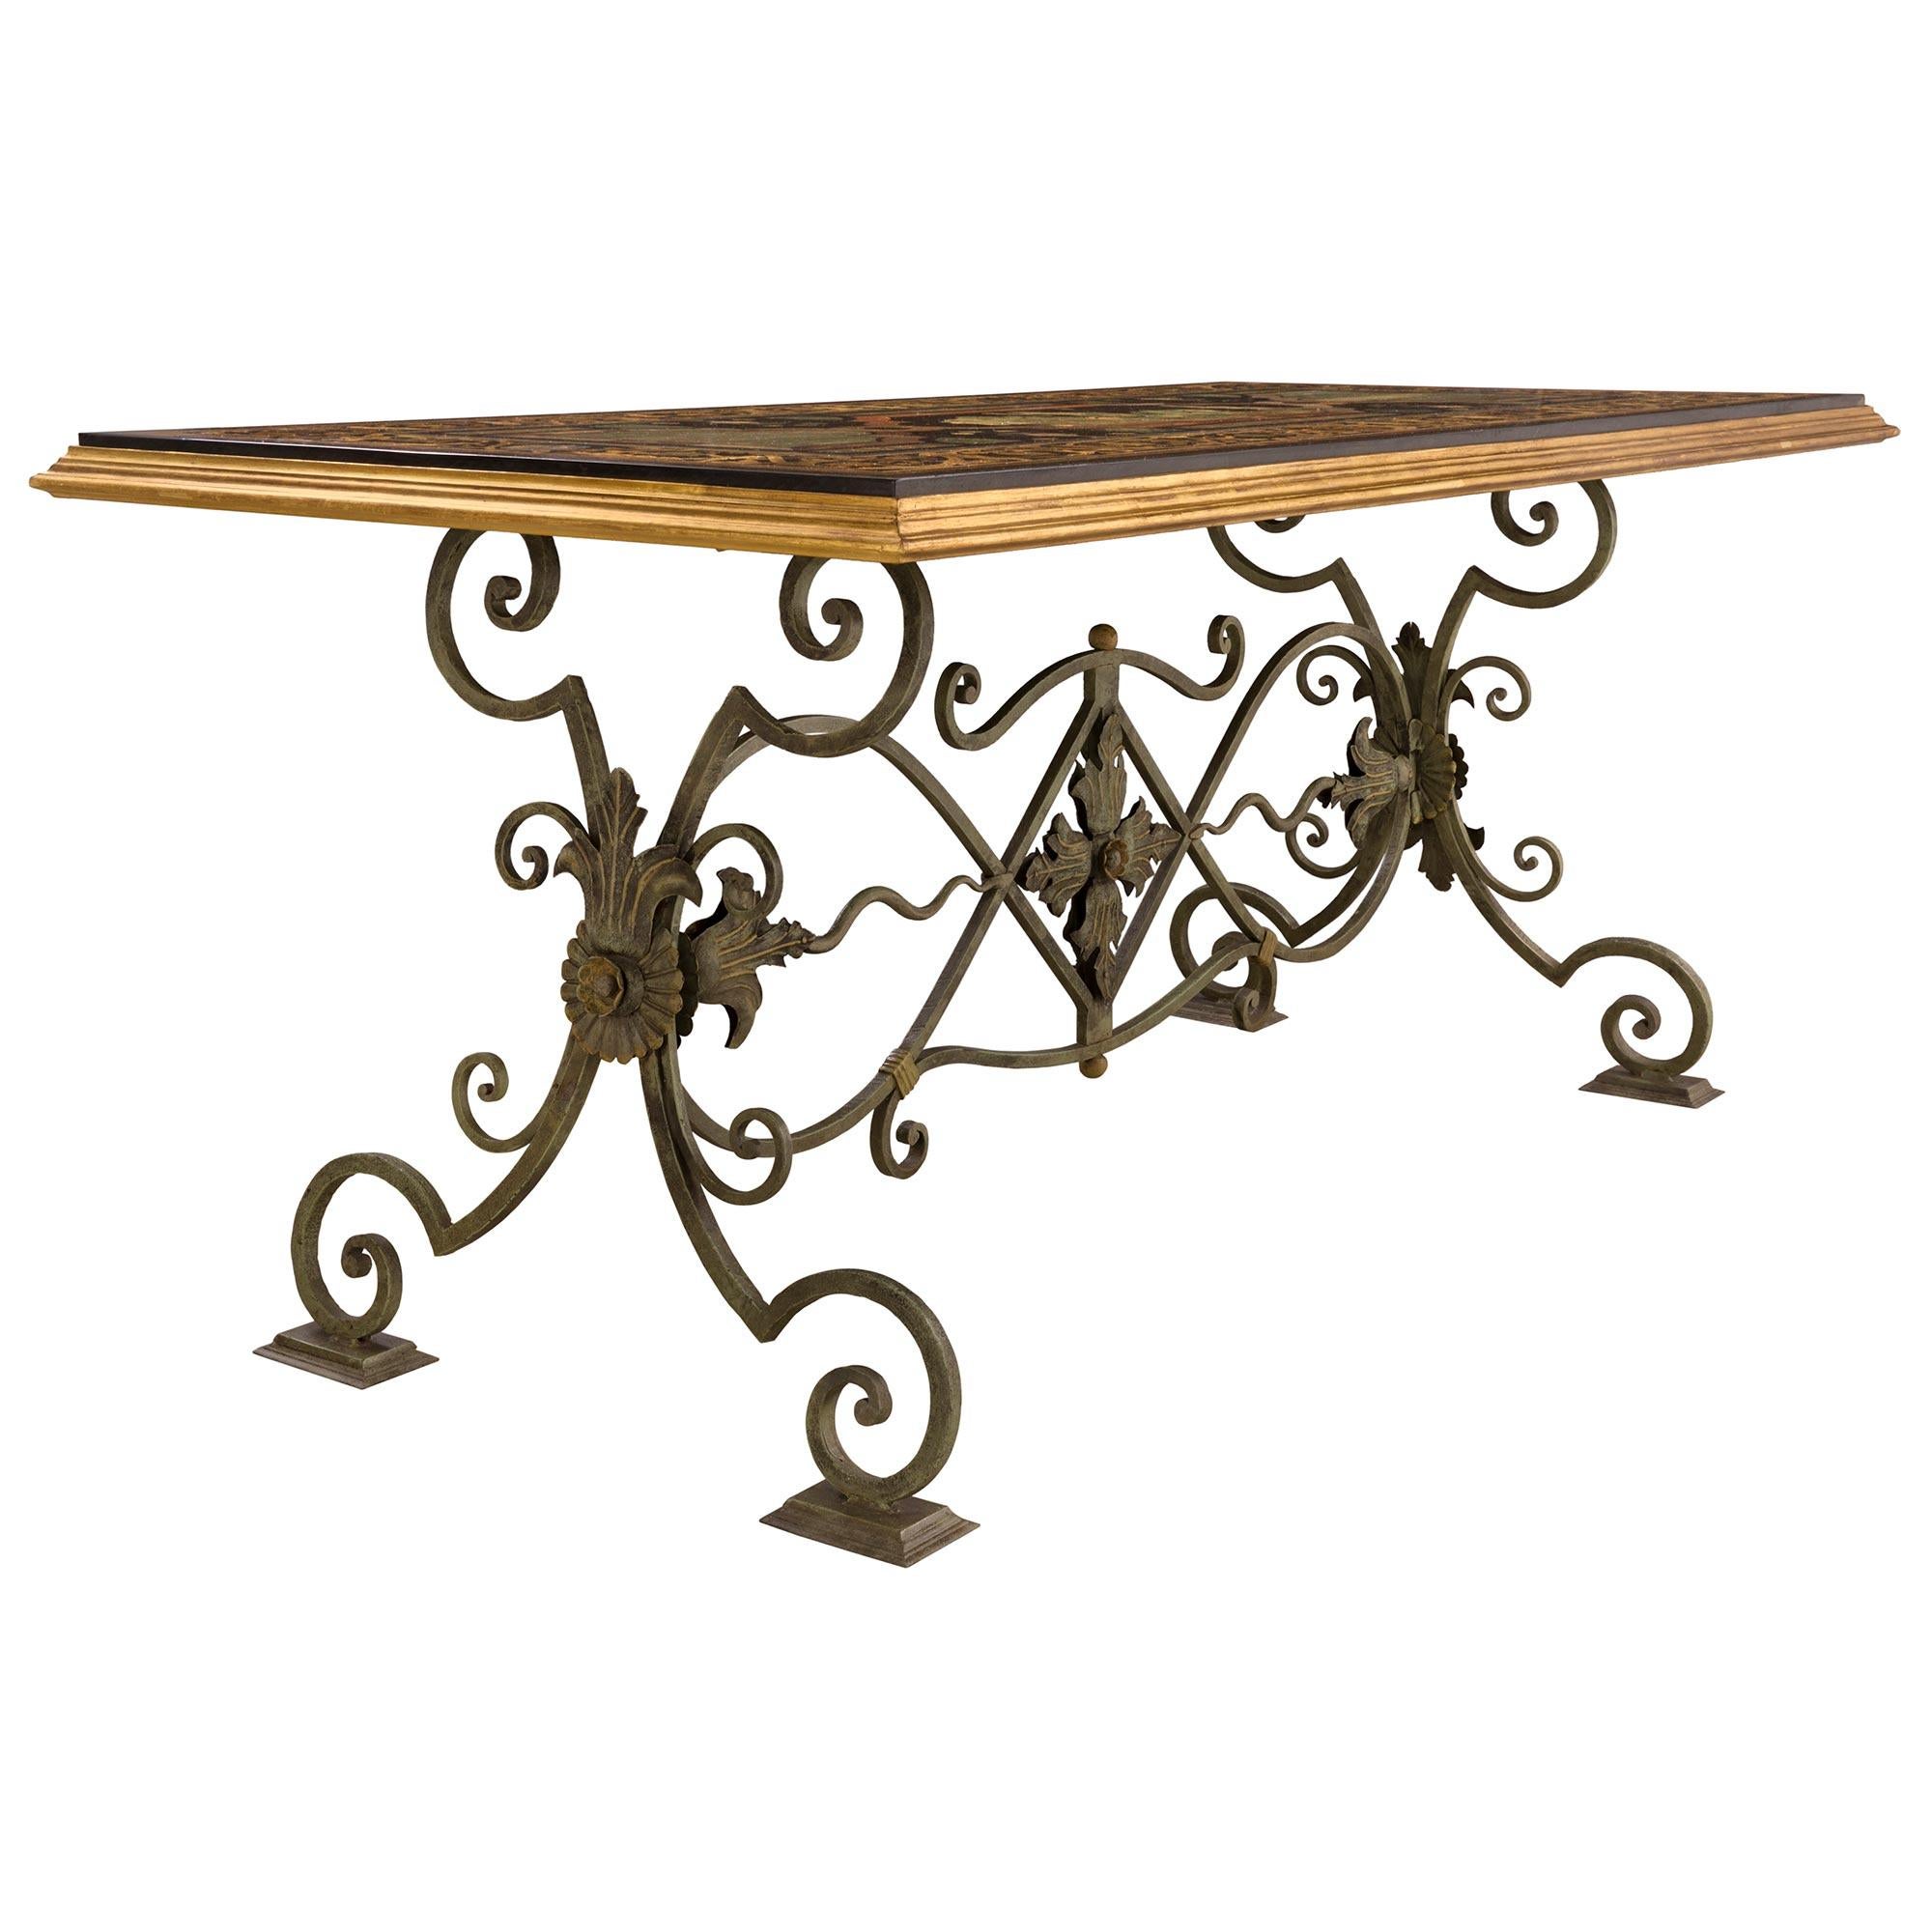 Italian 19th Century Wrought Iron, Giltwood and Scagliola Center or Dining Table For Sale 1